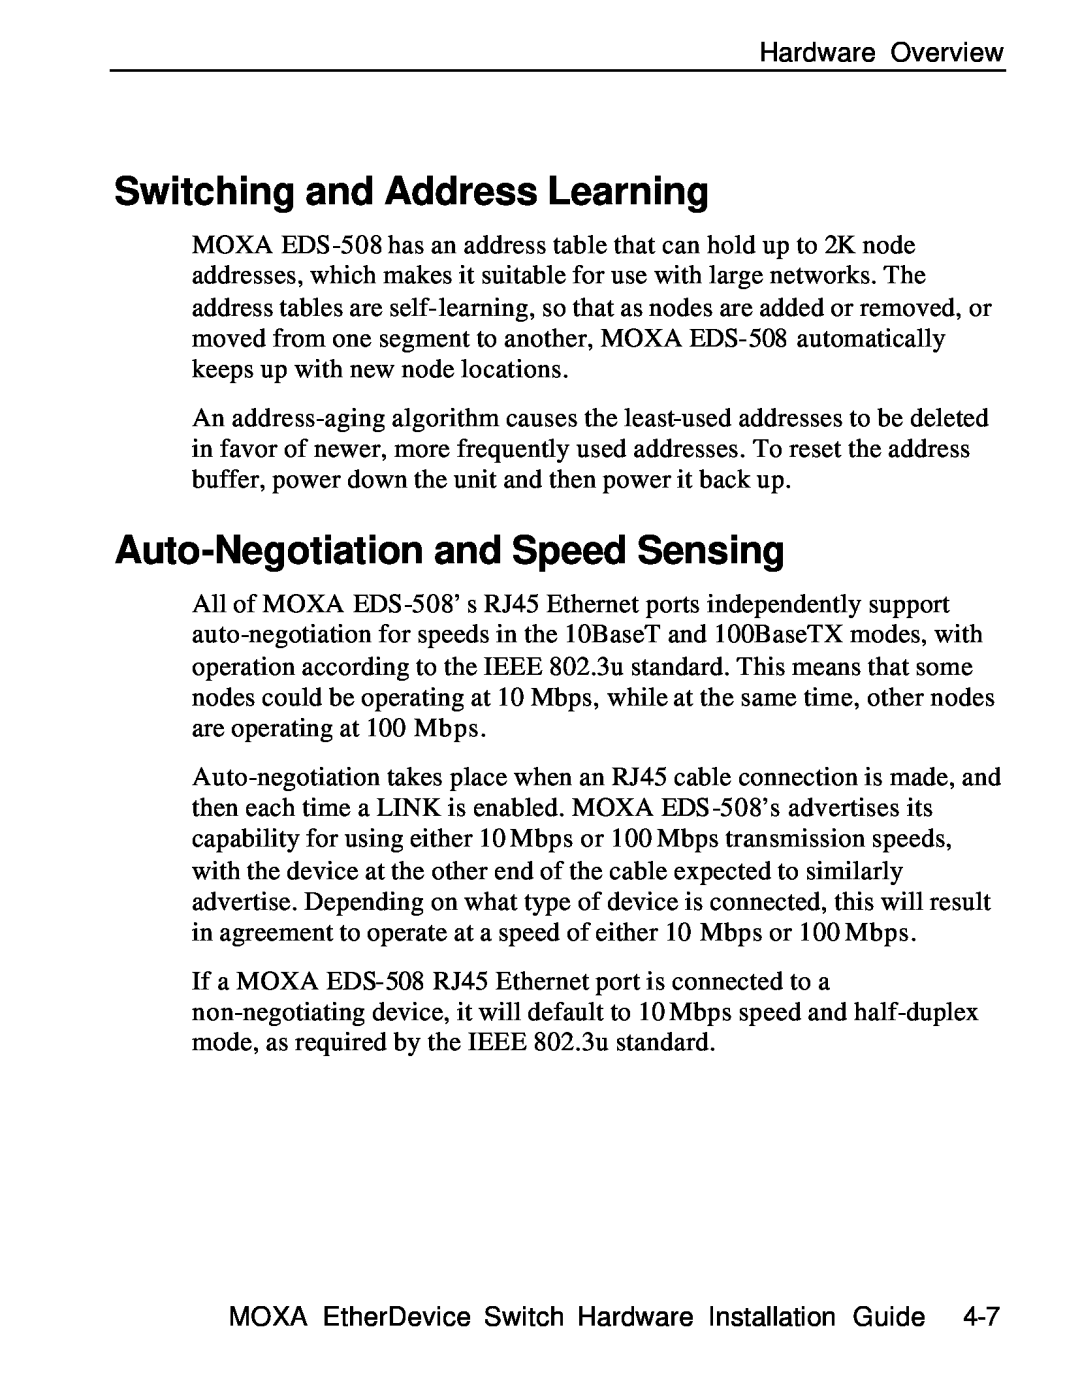 Moxa Technologies EDS-508 manual Switching and Address Learning, Auto-Negotiation and Speed Sensing 